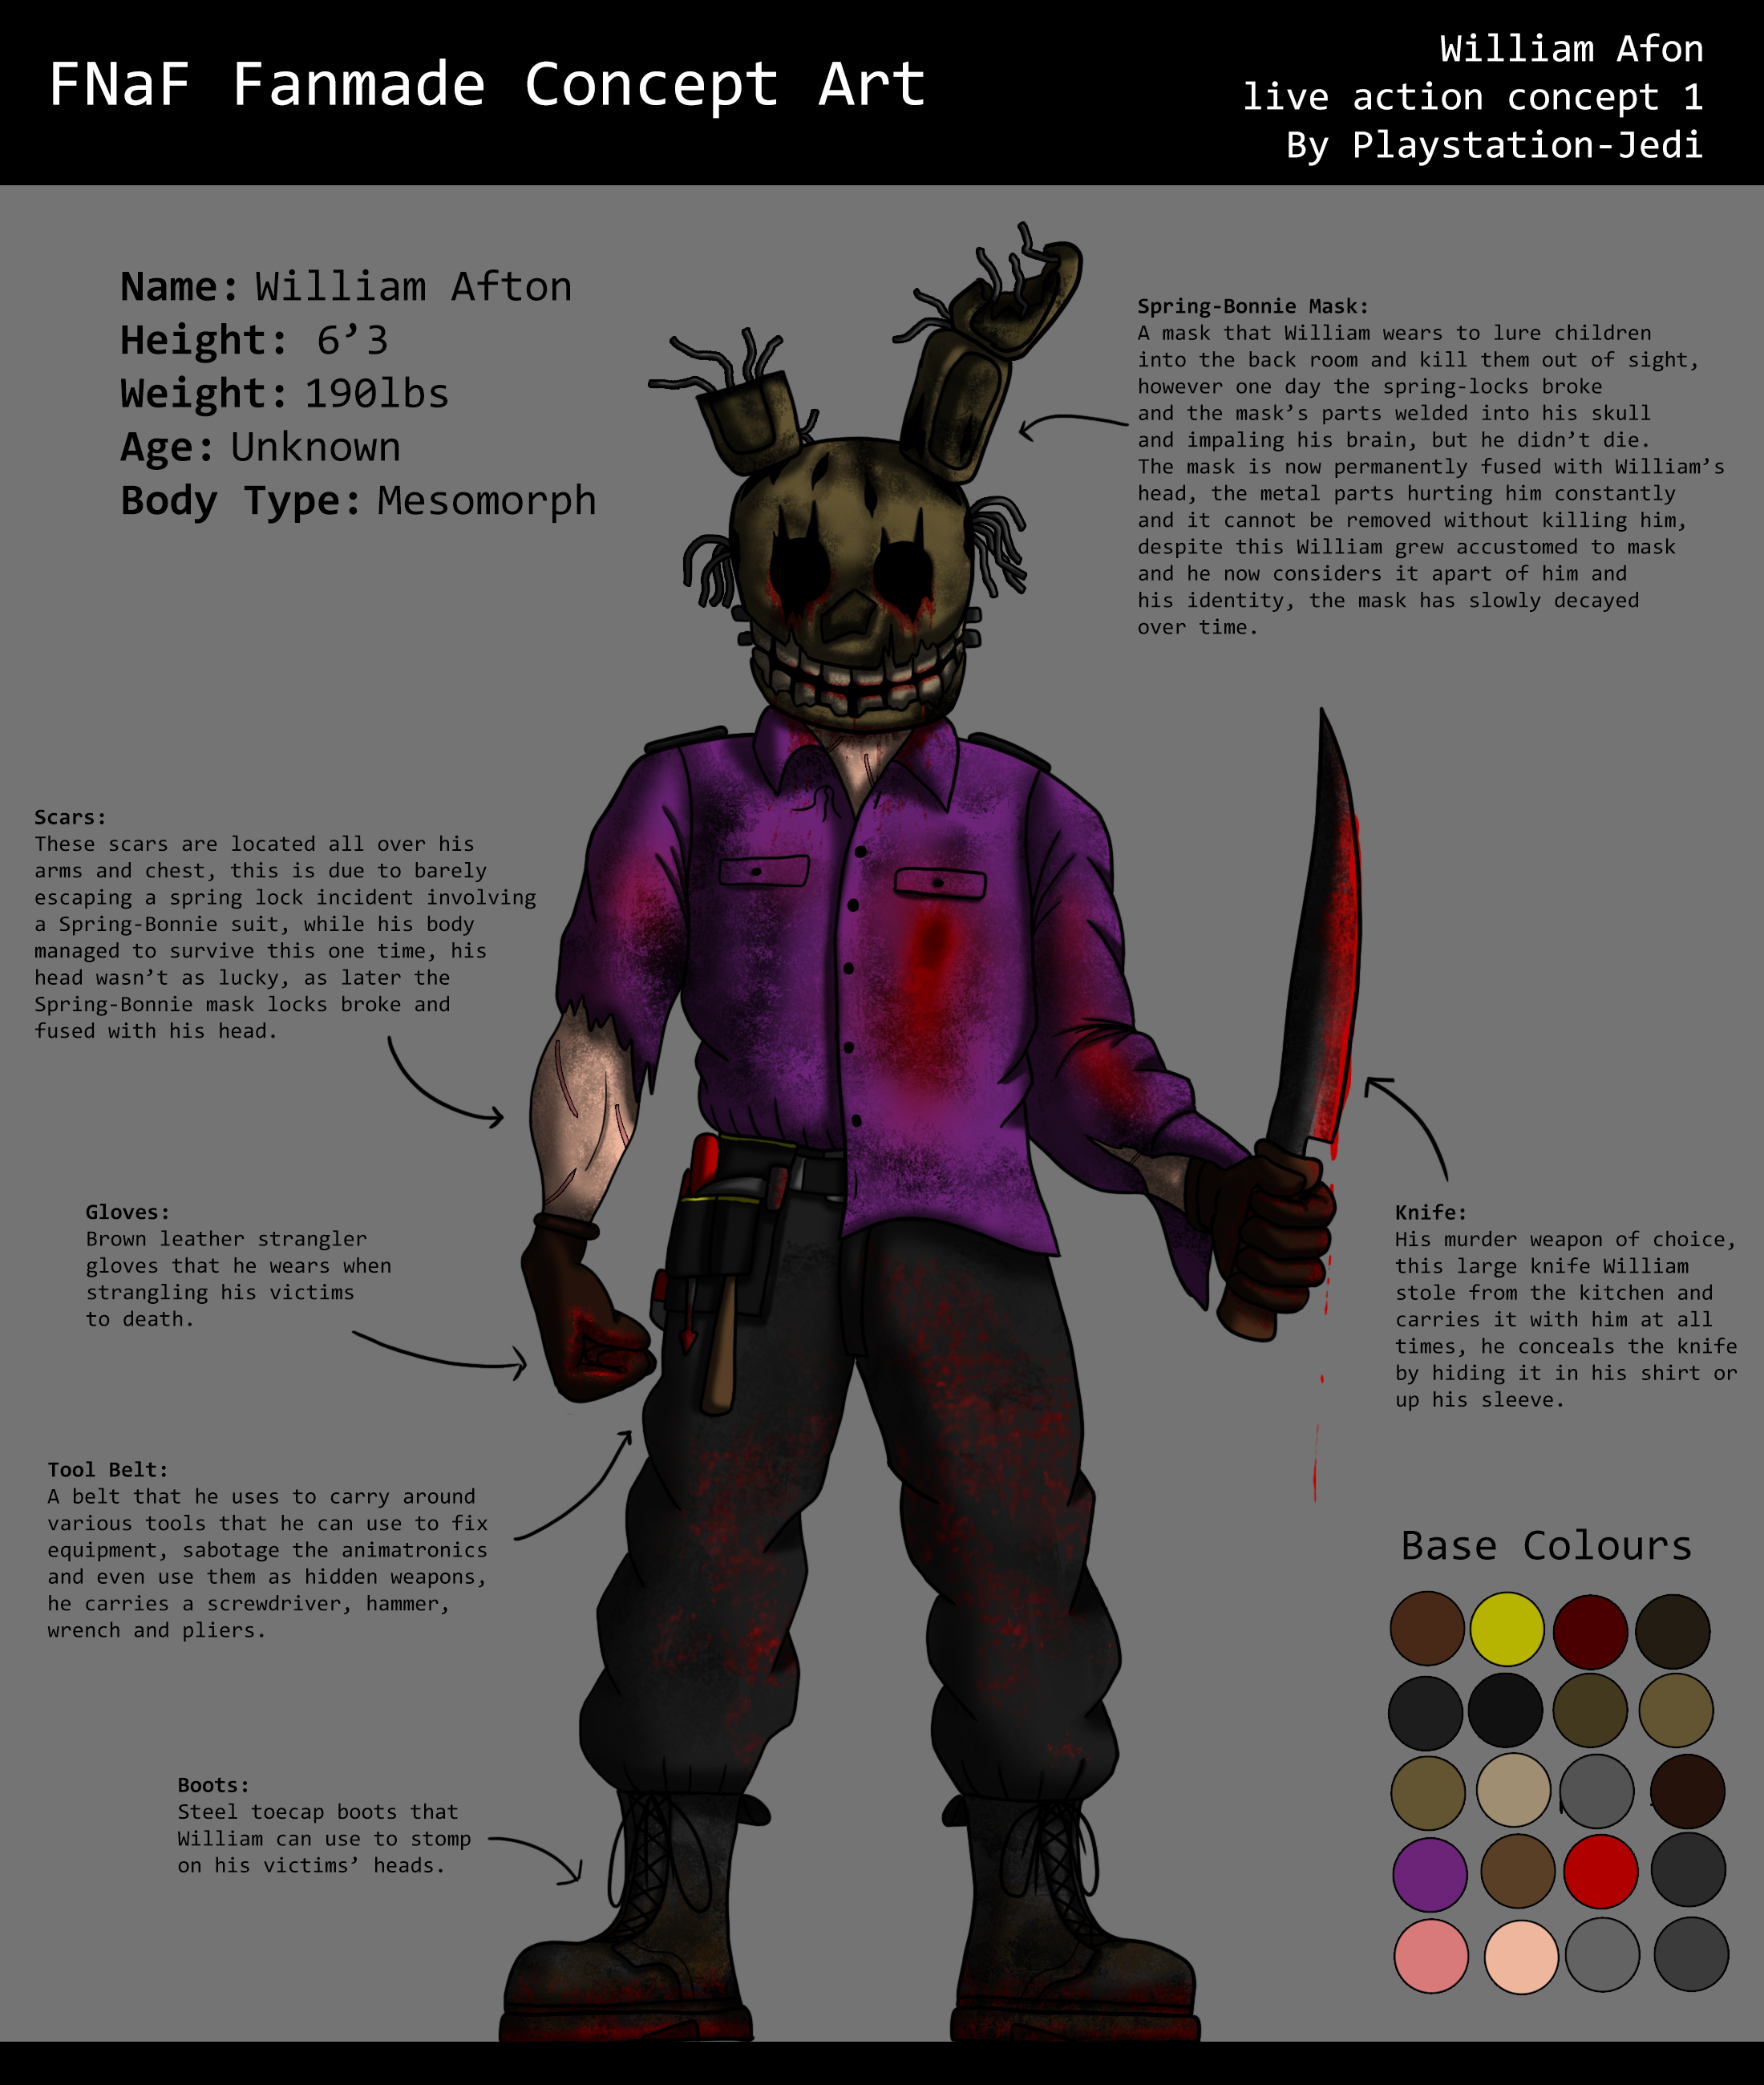 William Afton Real Life : fnaf william afton on Tumblr : Would he fall